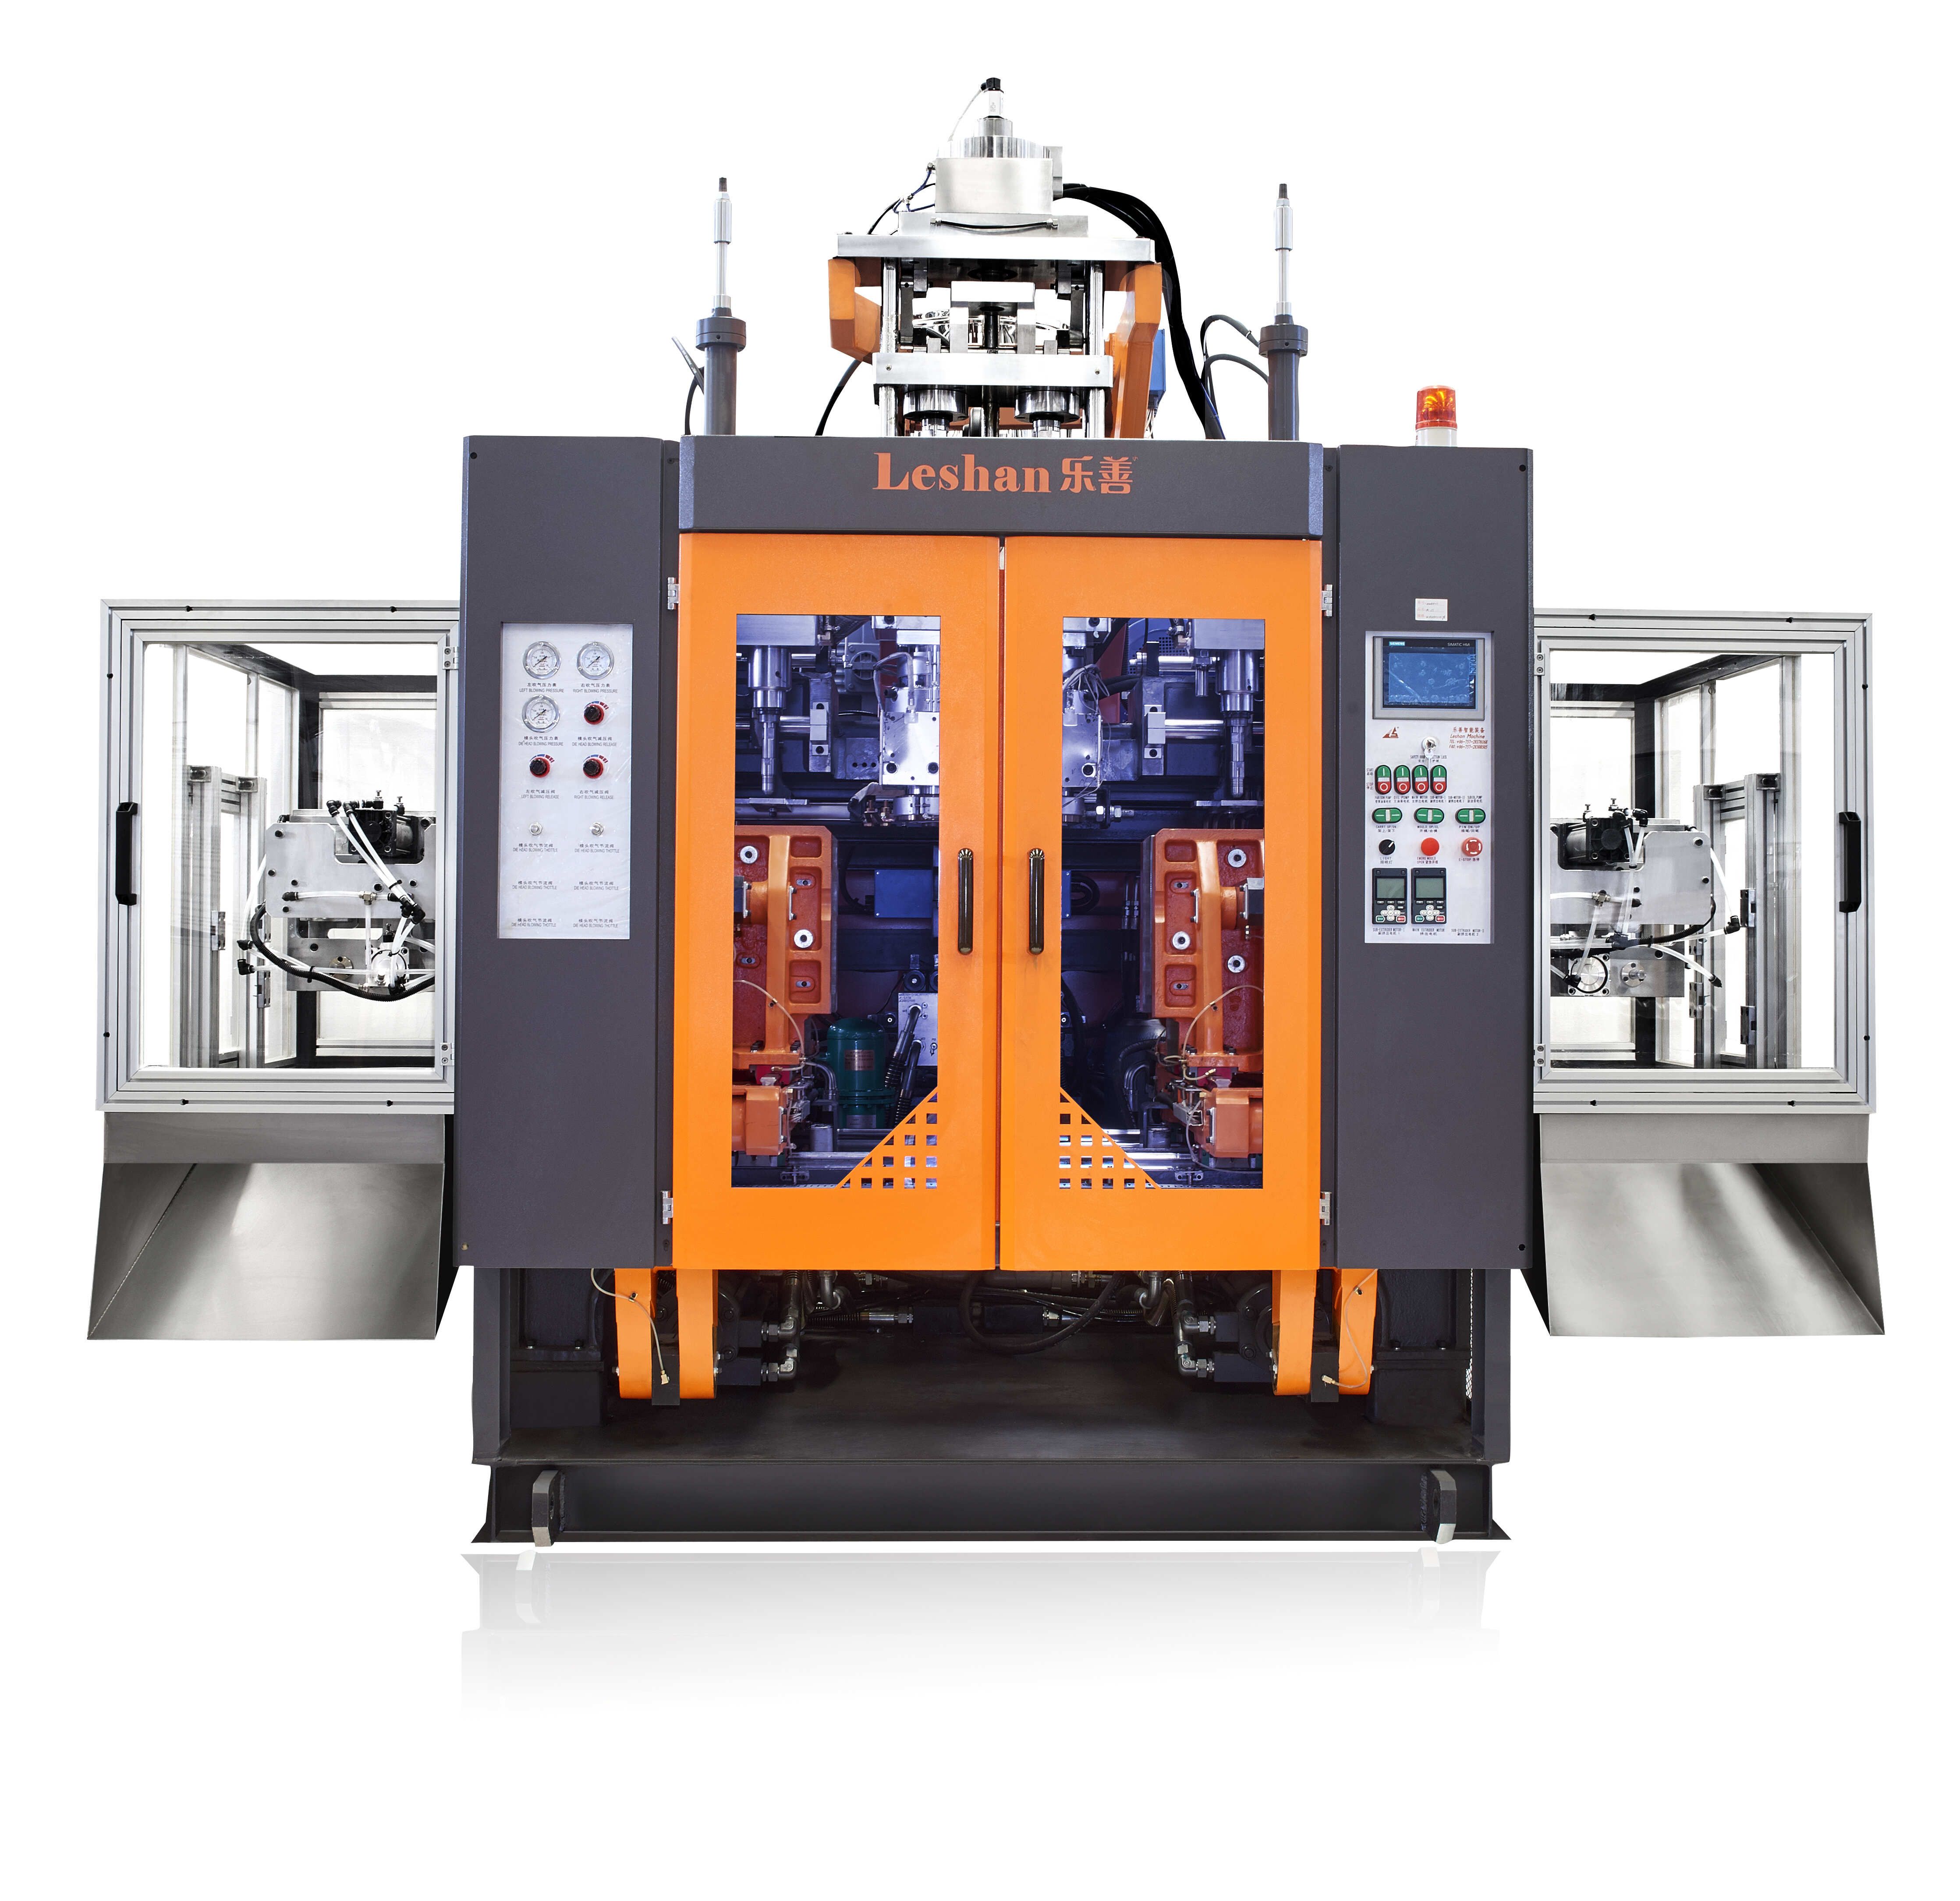 What is the difference between traditional 1 litre blow molding machine and fully computer-controlled blow molding machines?